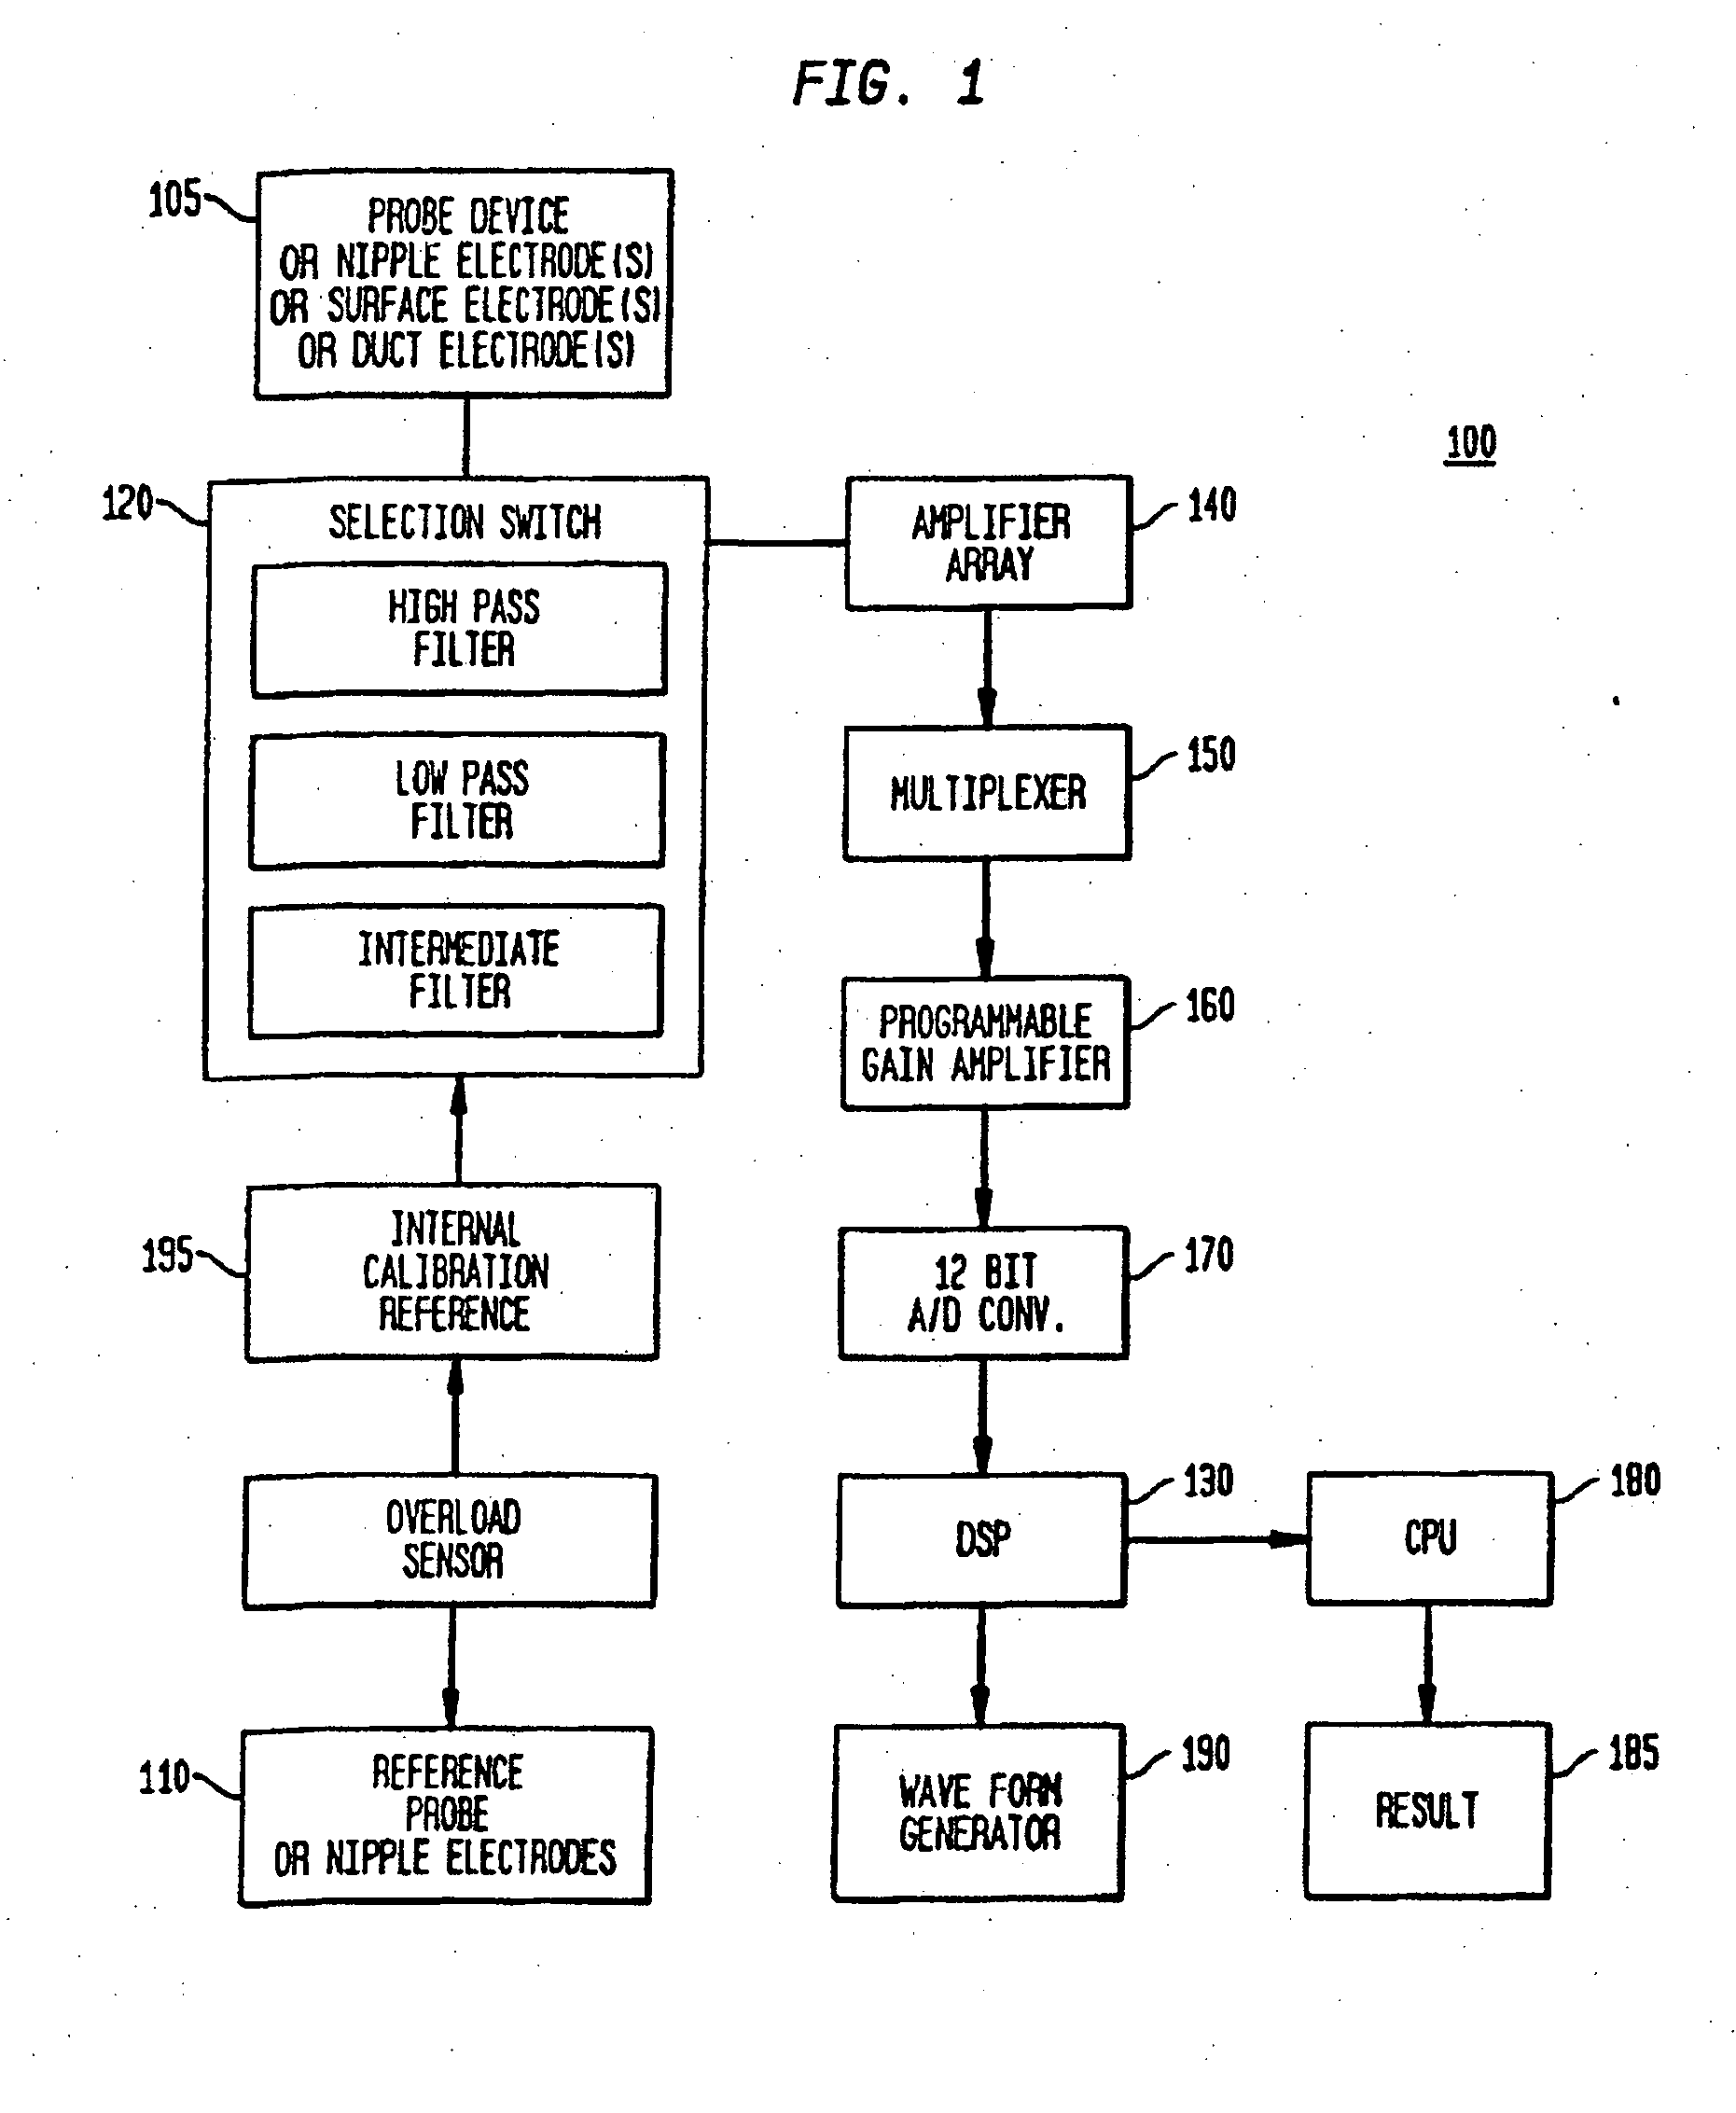 Method and system for detecting electrophysiological changes in pre-cancerous and cancerous tissue and epithelium